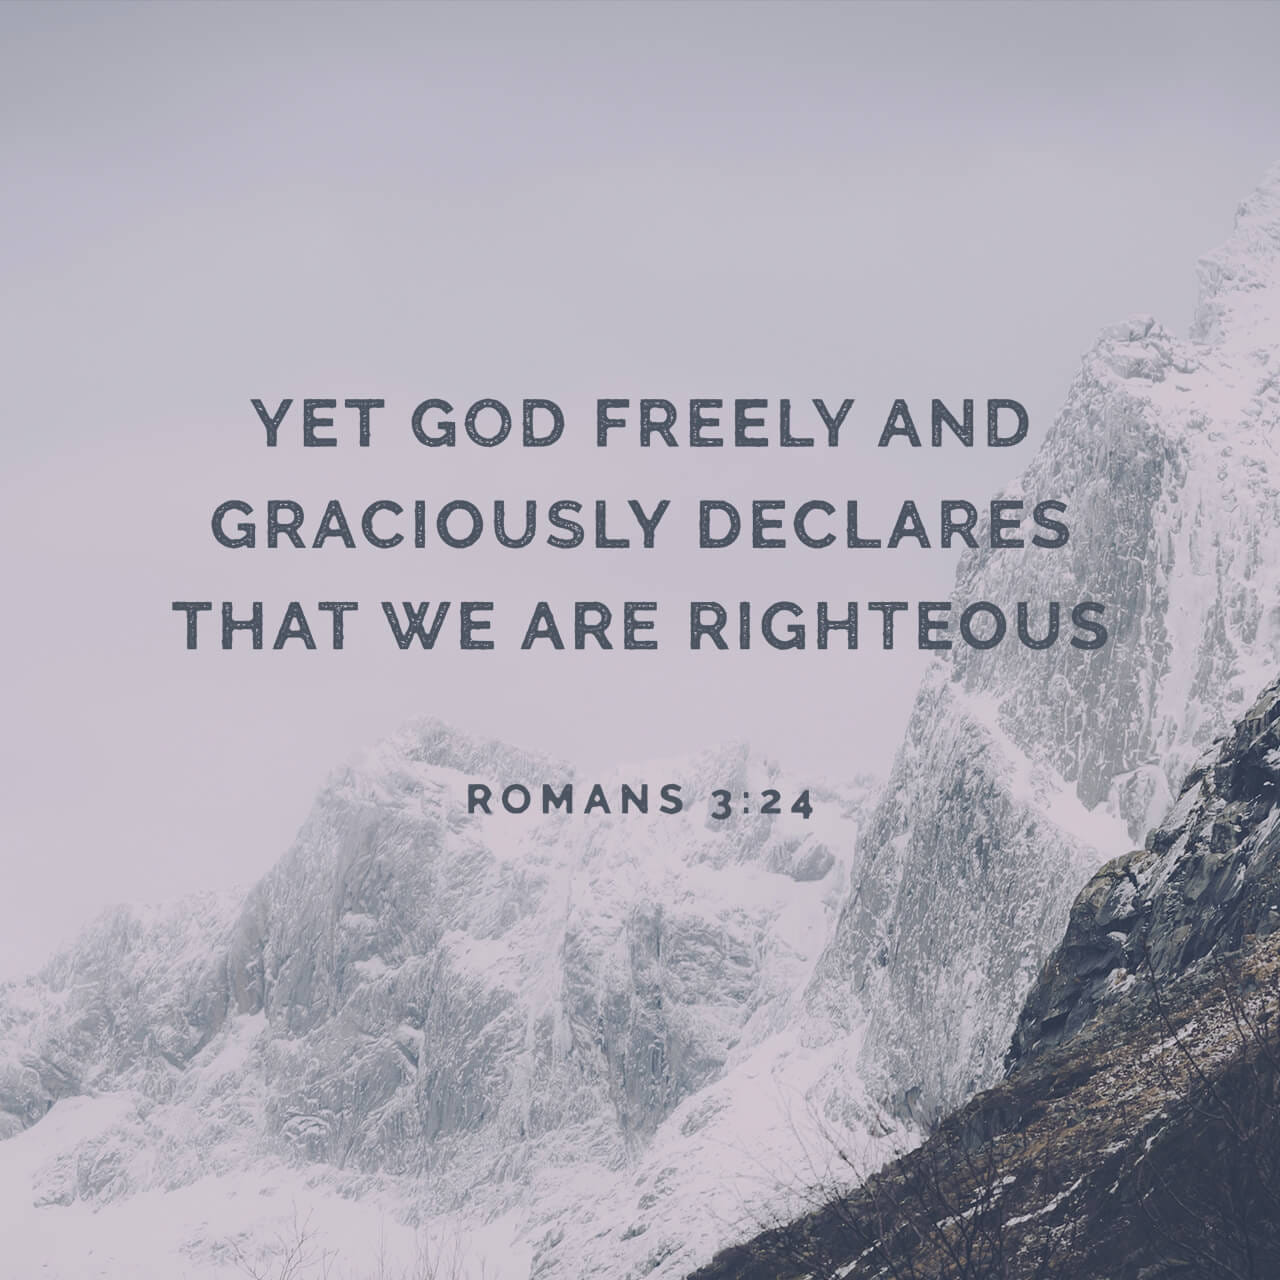 Bible Verse of the Day - day 256 - image 593 (Romans 3:23)